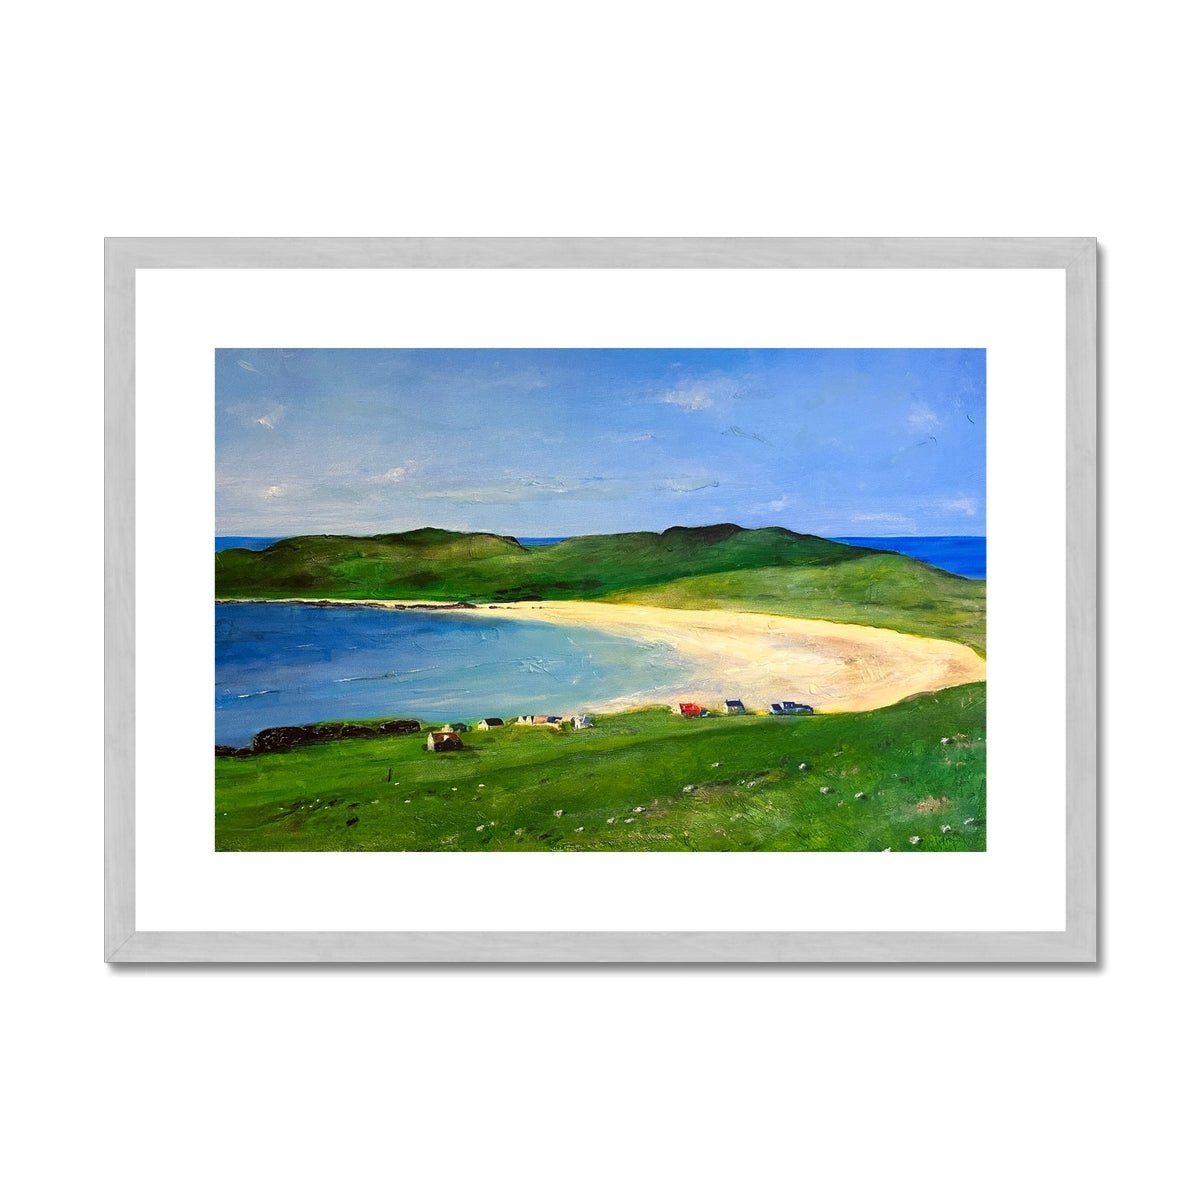 Balephuil Beach Tiree Painting | Antique Framed & Mounted Prints From Scotland-Antique Framed & Mounted Prints-Hebridean Islands Art Gallery-A2 Landscape-Silver Frame-Paintings, Prints, Homeware, Art Gifts From Scotland By Scottish Artist Kevin Hunter